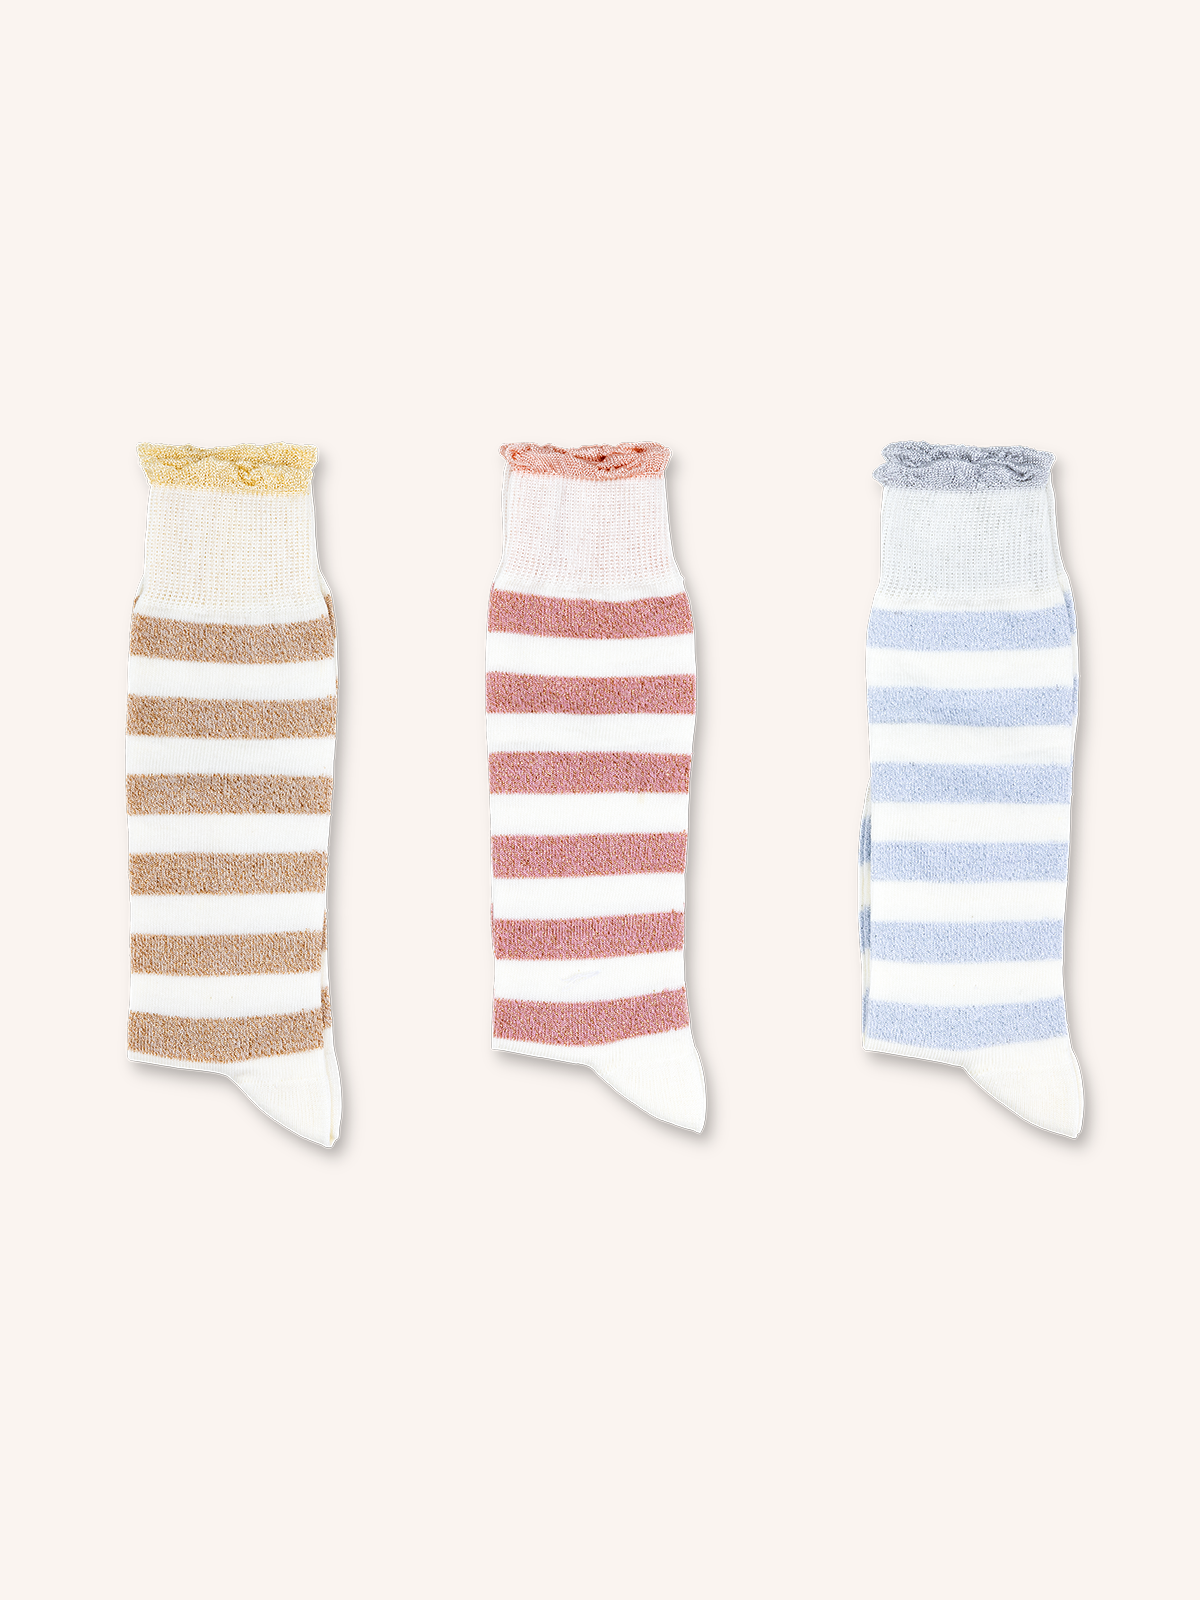 Long Socks with Lamè for Kids | Striped Dye | Pack of 3 Pairs | Glossy B